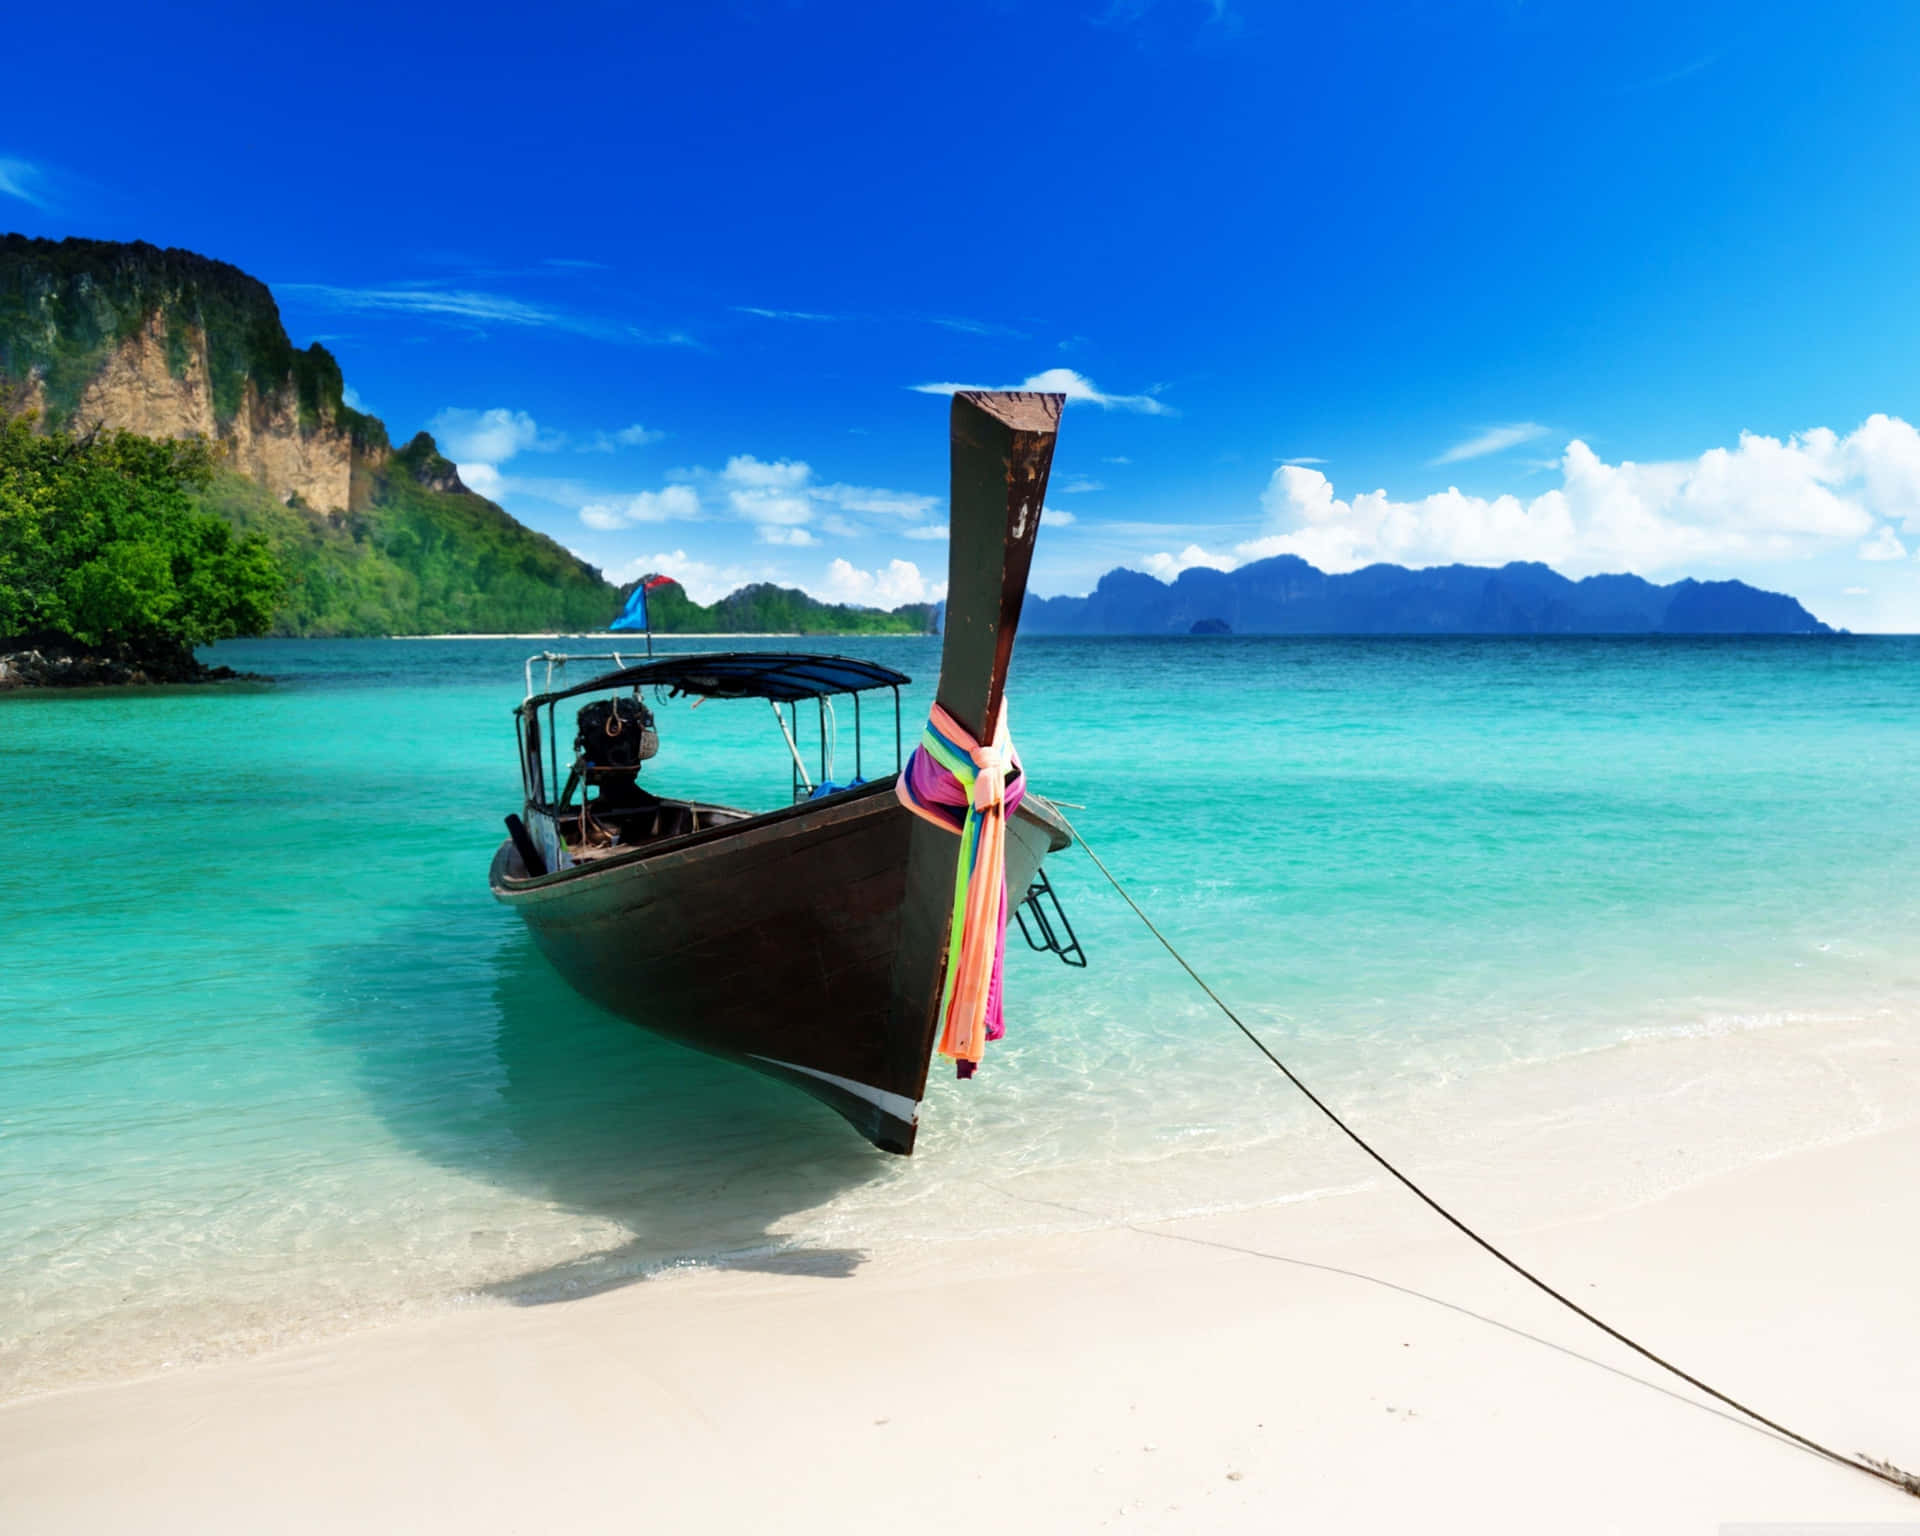 Take a breath of serenity in Thailand